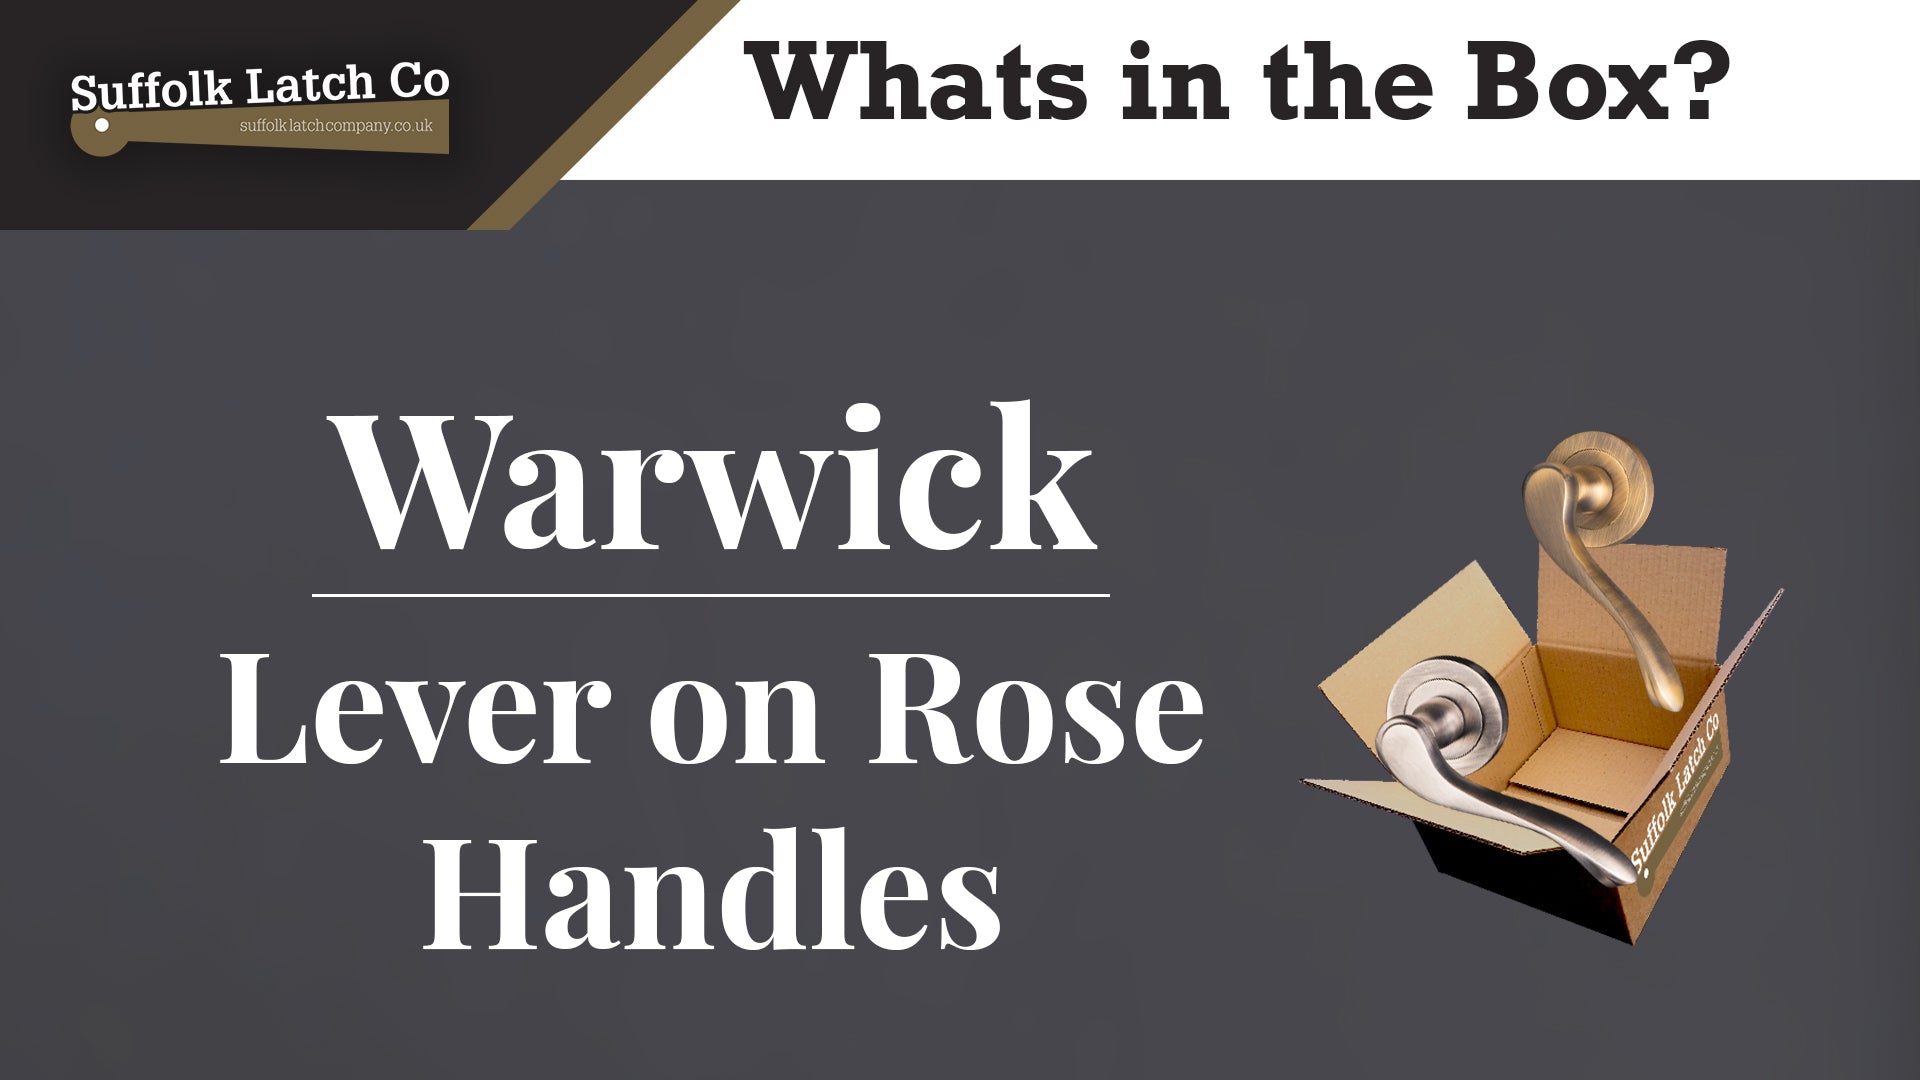 What's in the Box: Warwick Lever on Rose - Old English Collection